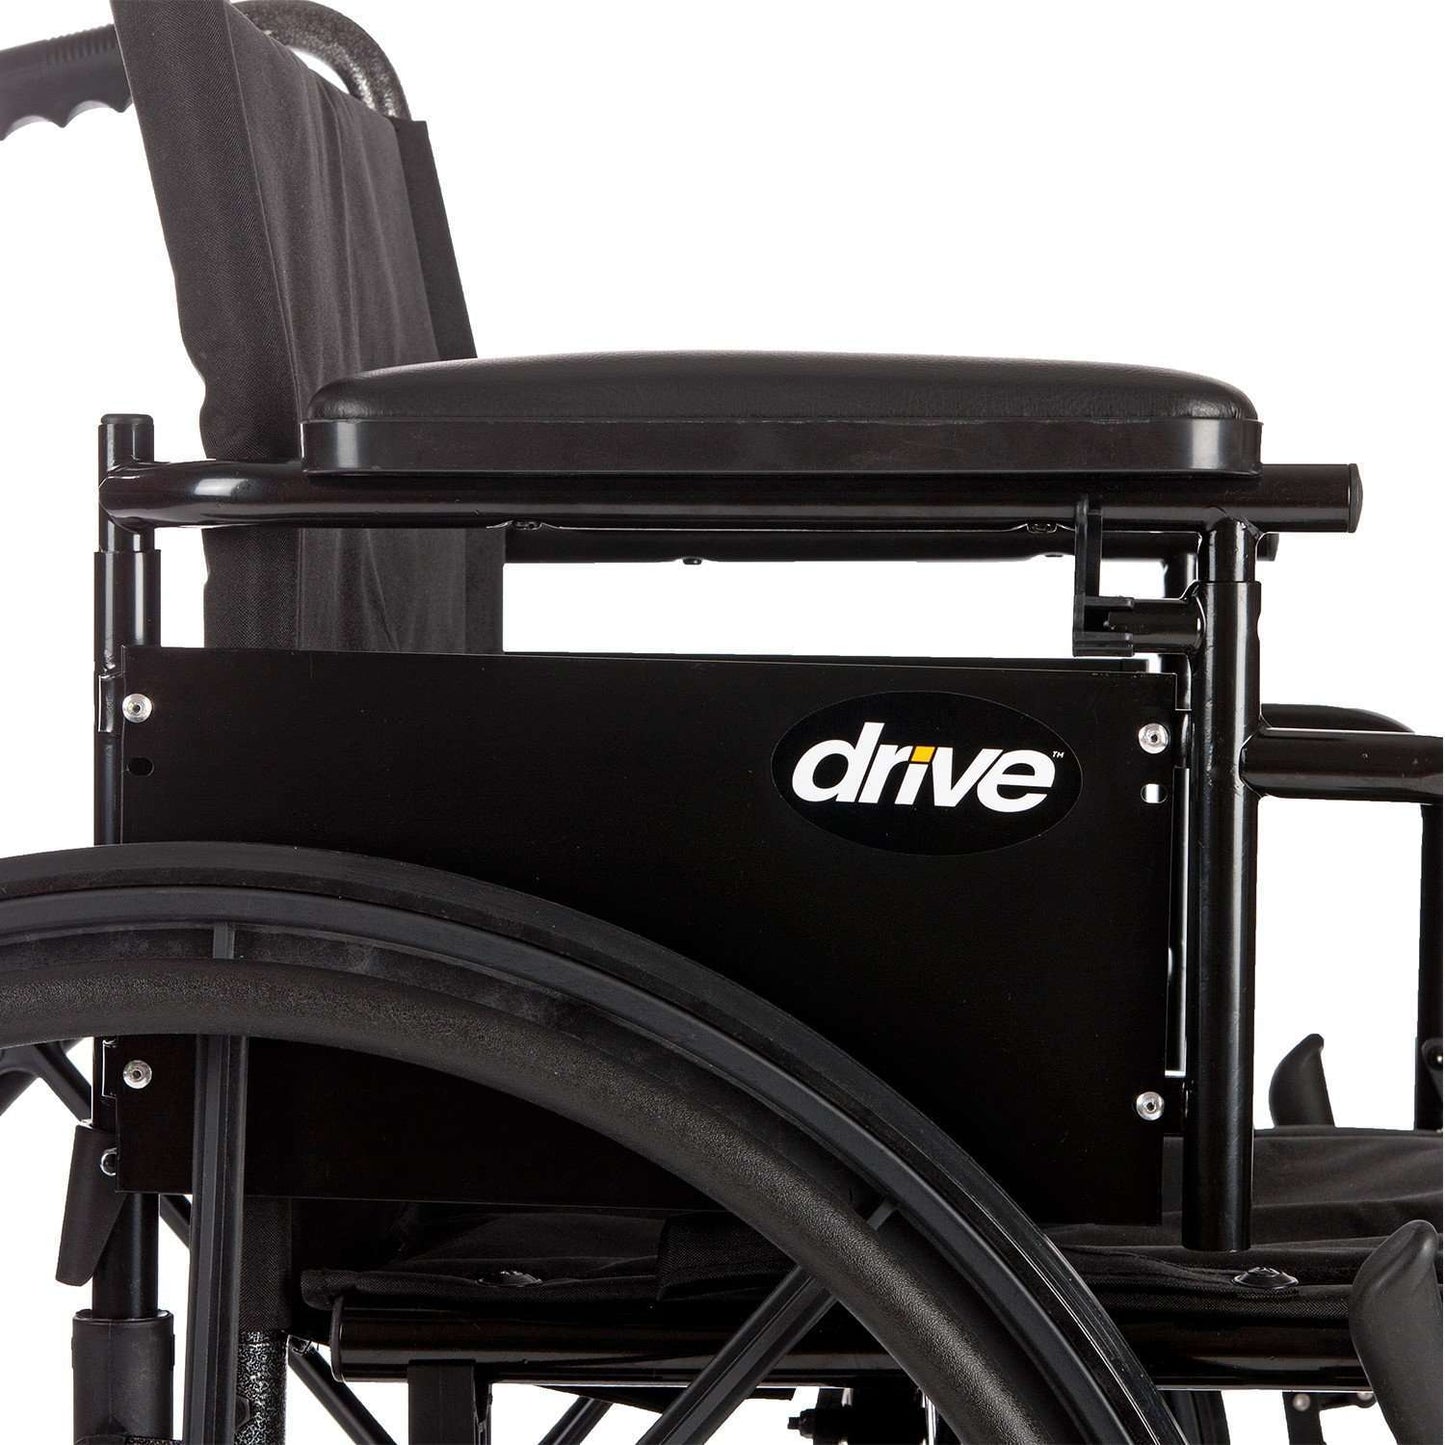 Drive cx418adda-sf Cruiser X4 Lightweight Dual Axle Wheelchair with Adjustable Detachable Arms, Desk Arms, Swing Away Footrests, 18" Seat